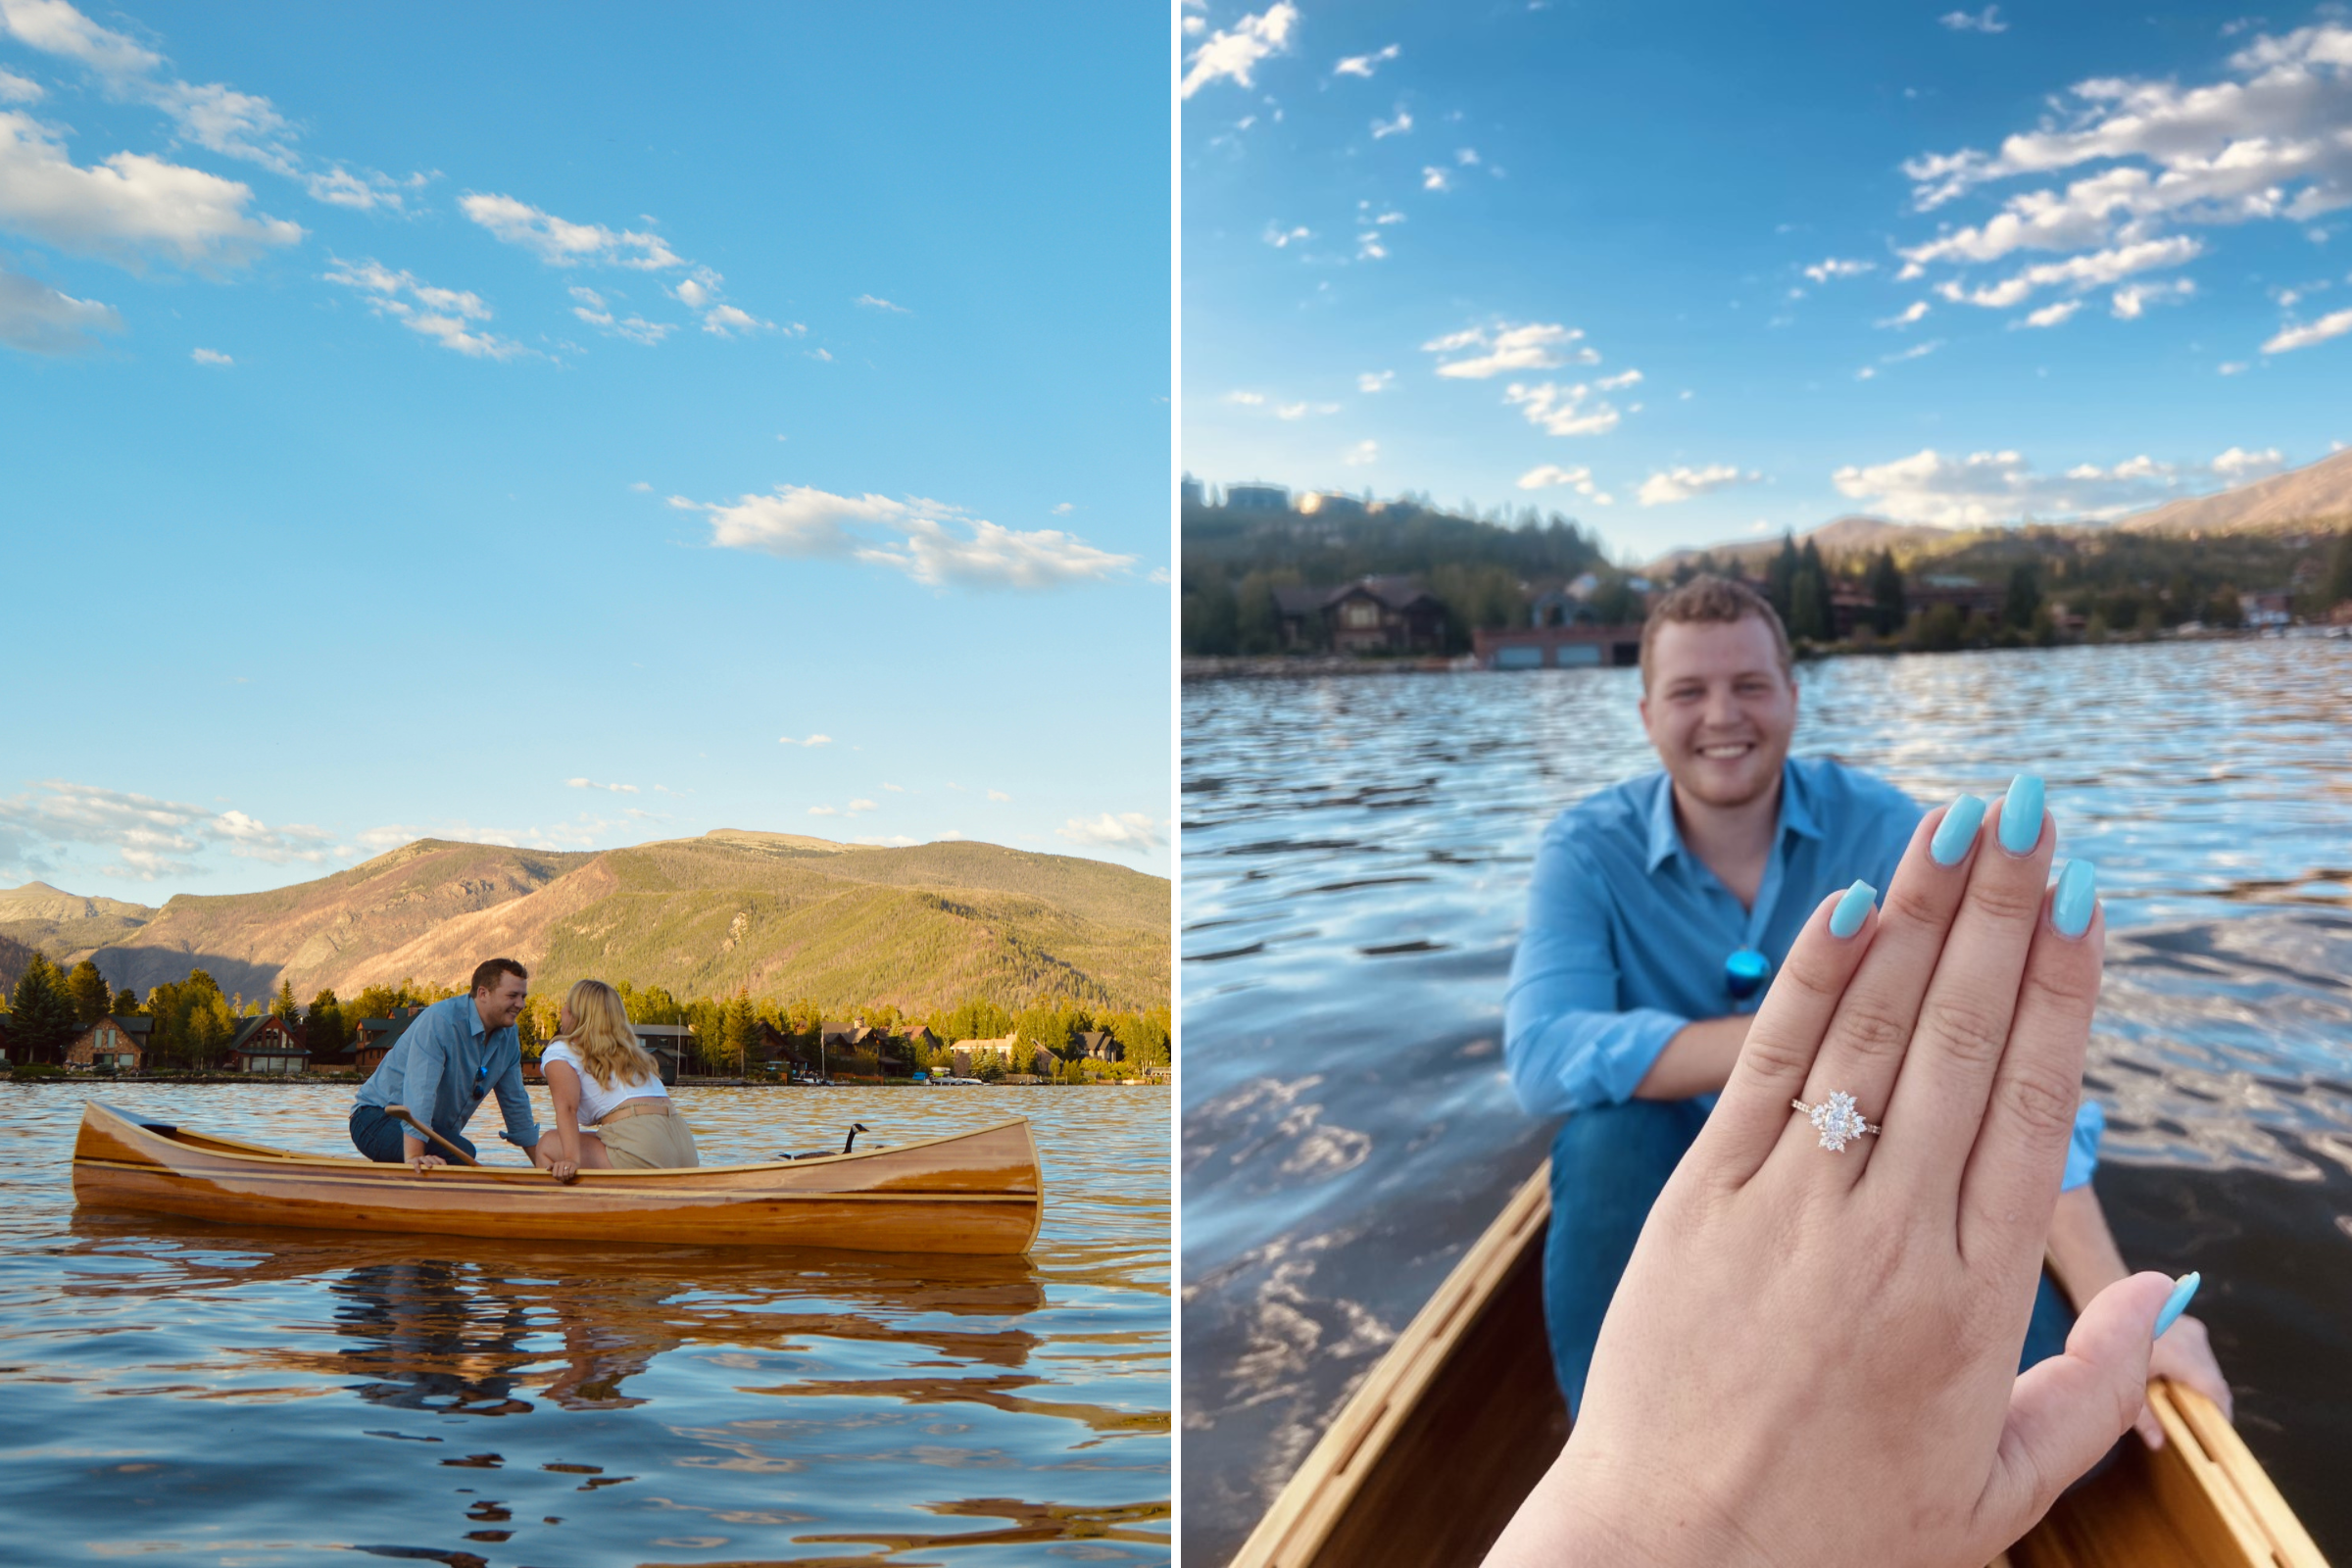 Man Spends 3 Years Painstakingly Perfecting Proposal to Girlfriend